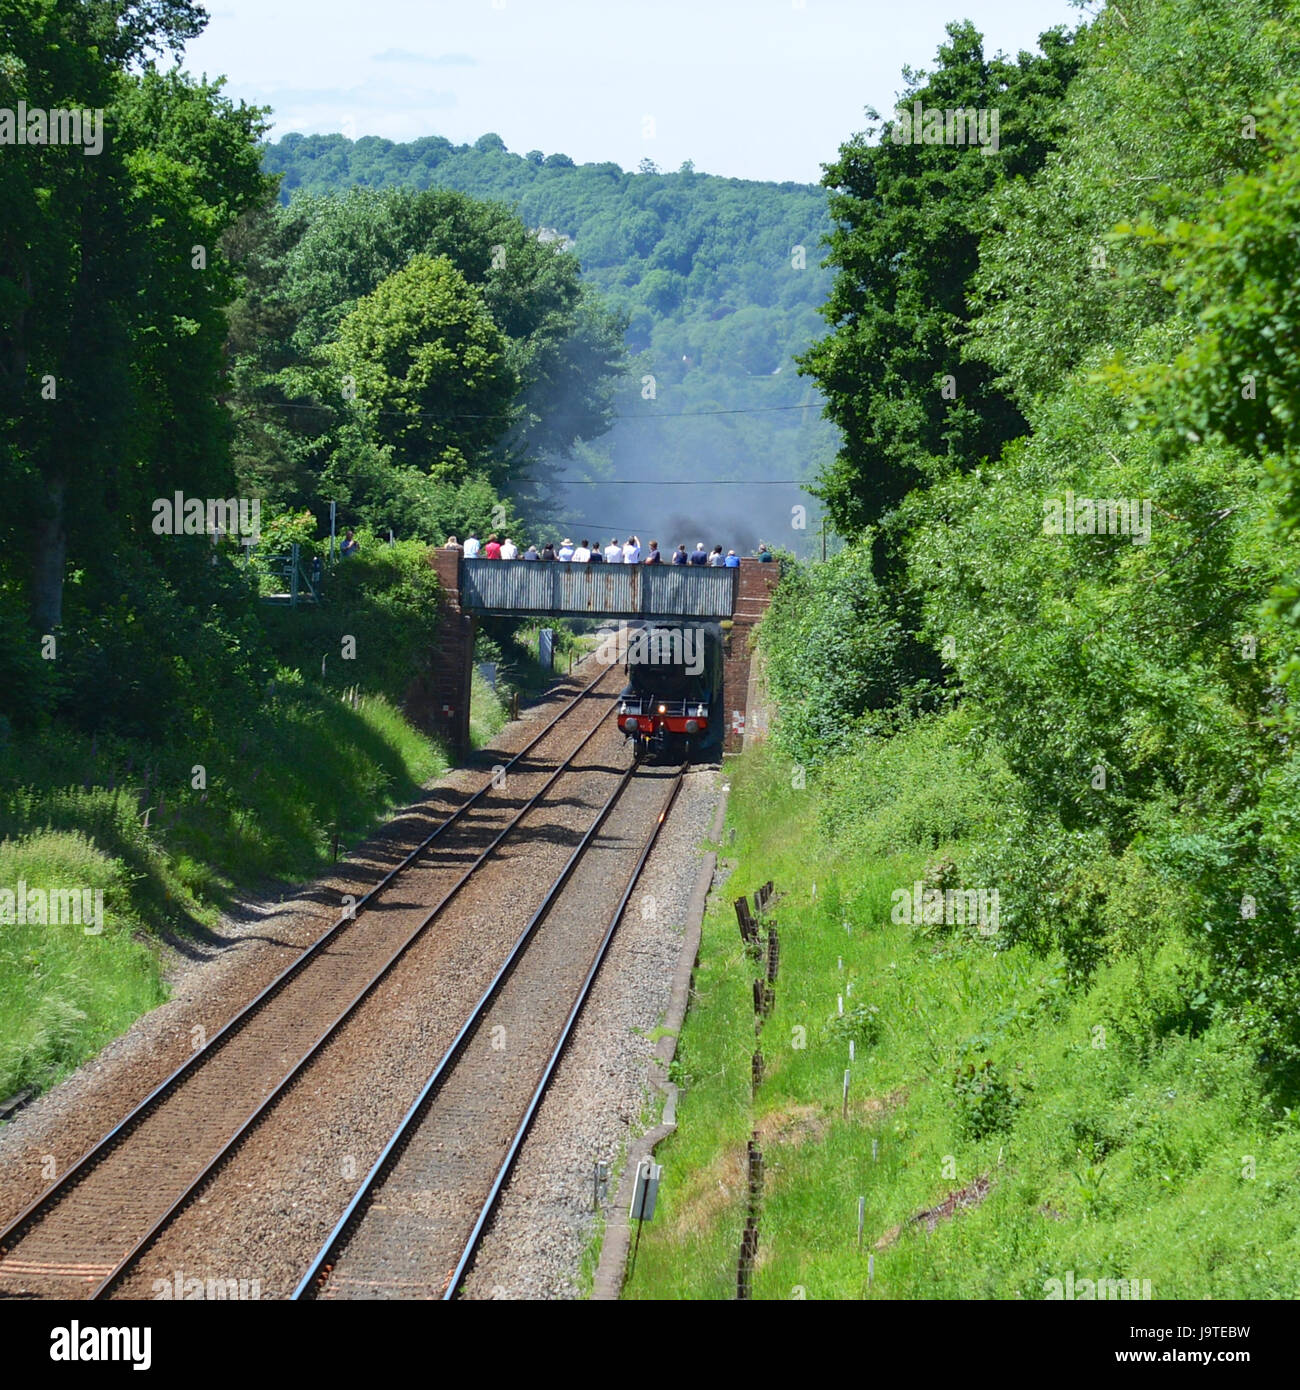 Reigate, Surrey, UK. 3rd June, 2017. Crowds wait in anticipation to see the Flying Scotsman 60103 Cathedrals Express Steam Locomotive hauling pullman coaches as it speeds through Reigate in Surrey. 1304hrs Saturday 3rd June 2017. Photo ©Lindsay Constable / Alamy Live News Stock Photo